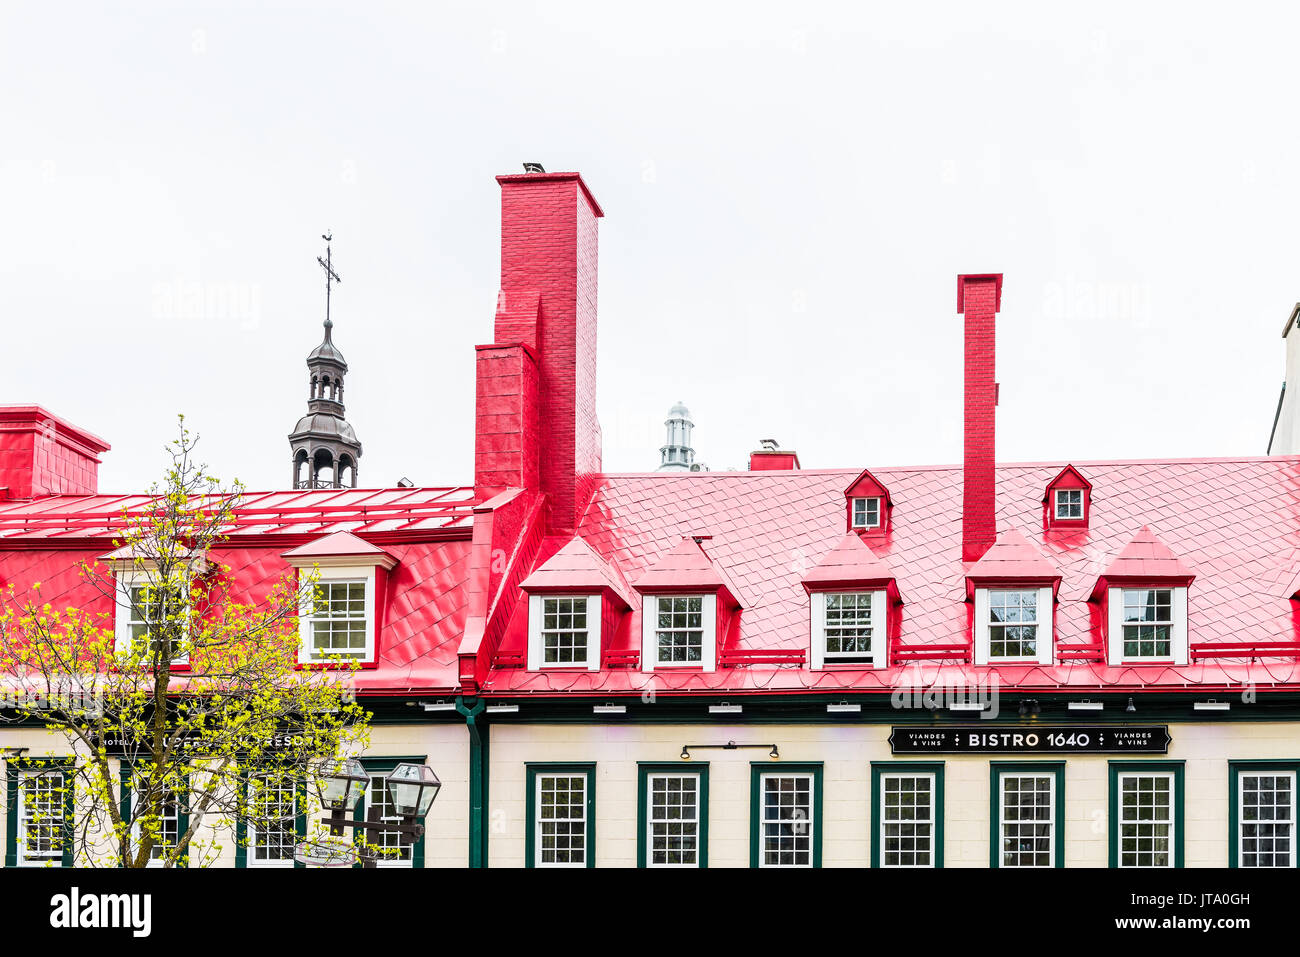 Quebec City, Canada - May 29, 2017: Old town Sainte Anne street with red restaurant bistro roof and Notre-Dame church steeple Stock Photo